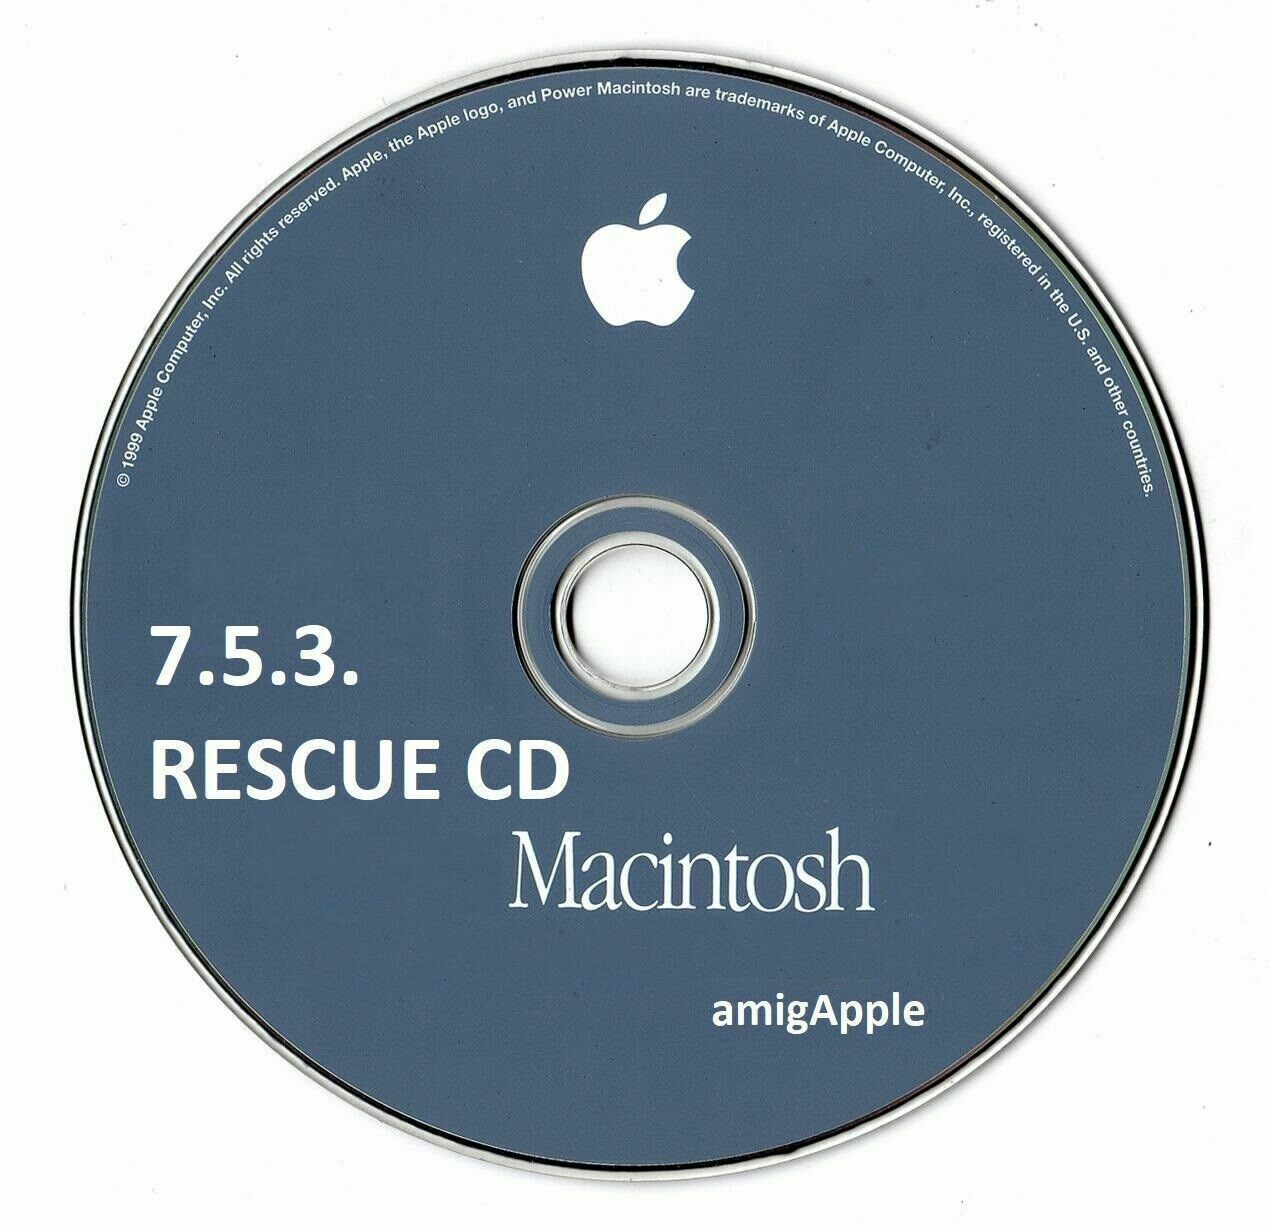 Macintosh software 7.5.3 rescue cd hd tools expanders stuffit expander